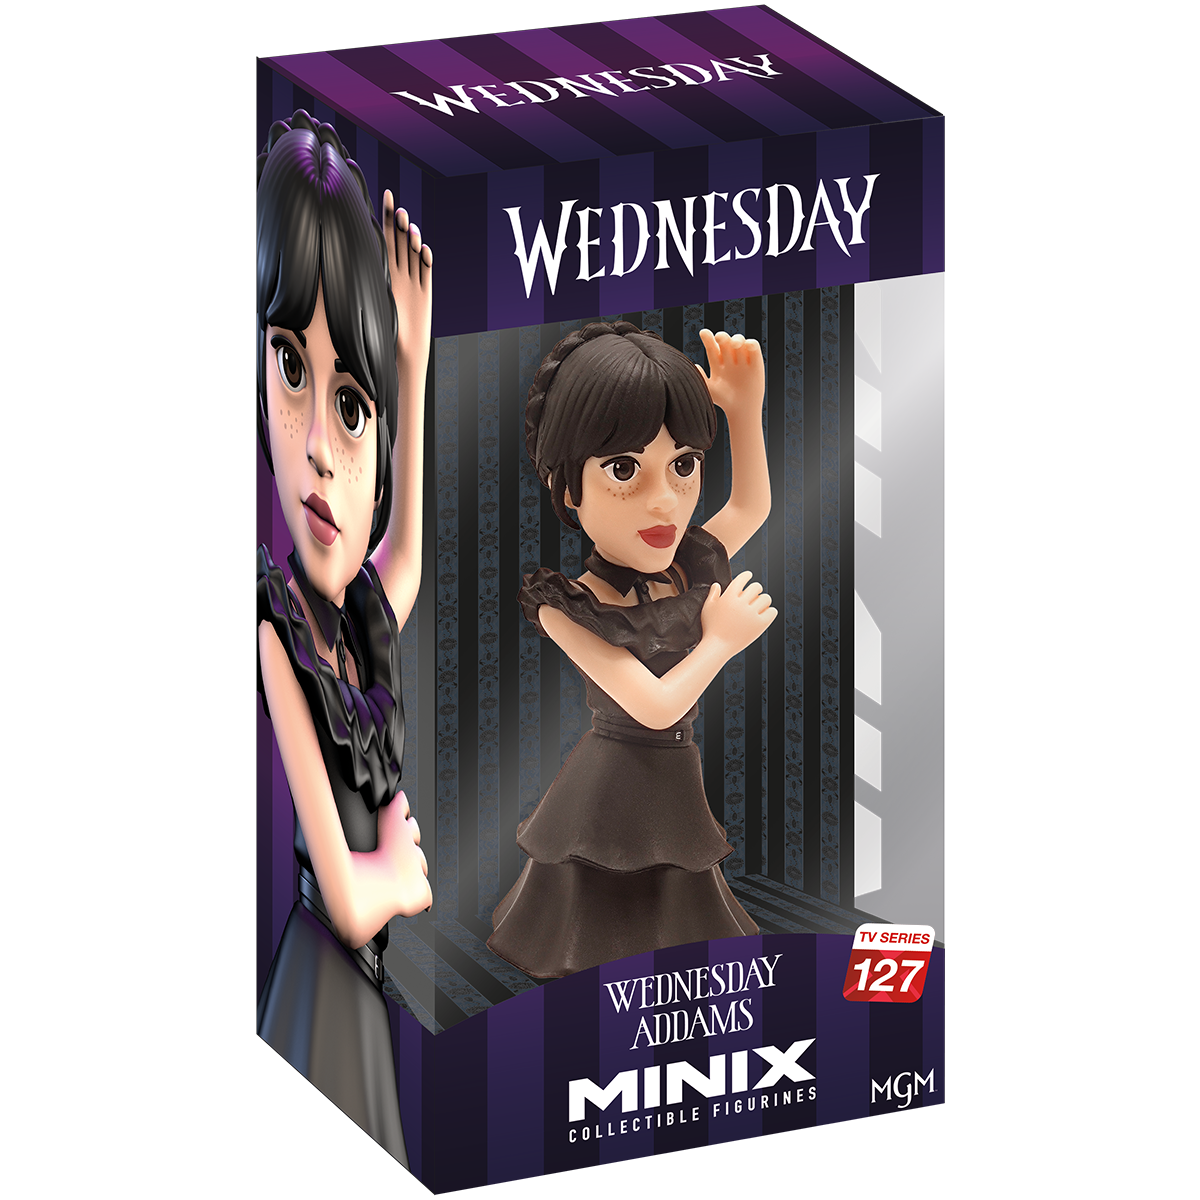 Minix collectible figurines - wednesday in dance dress - 